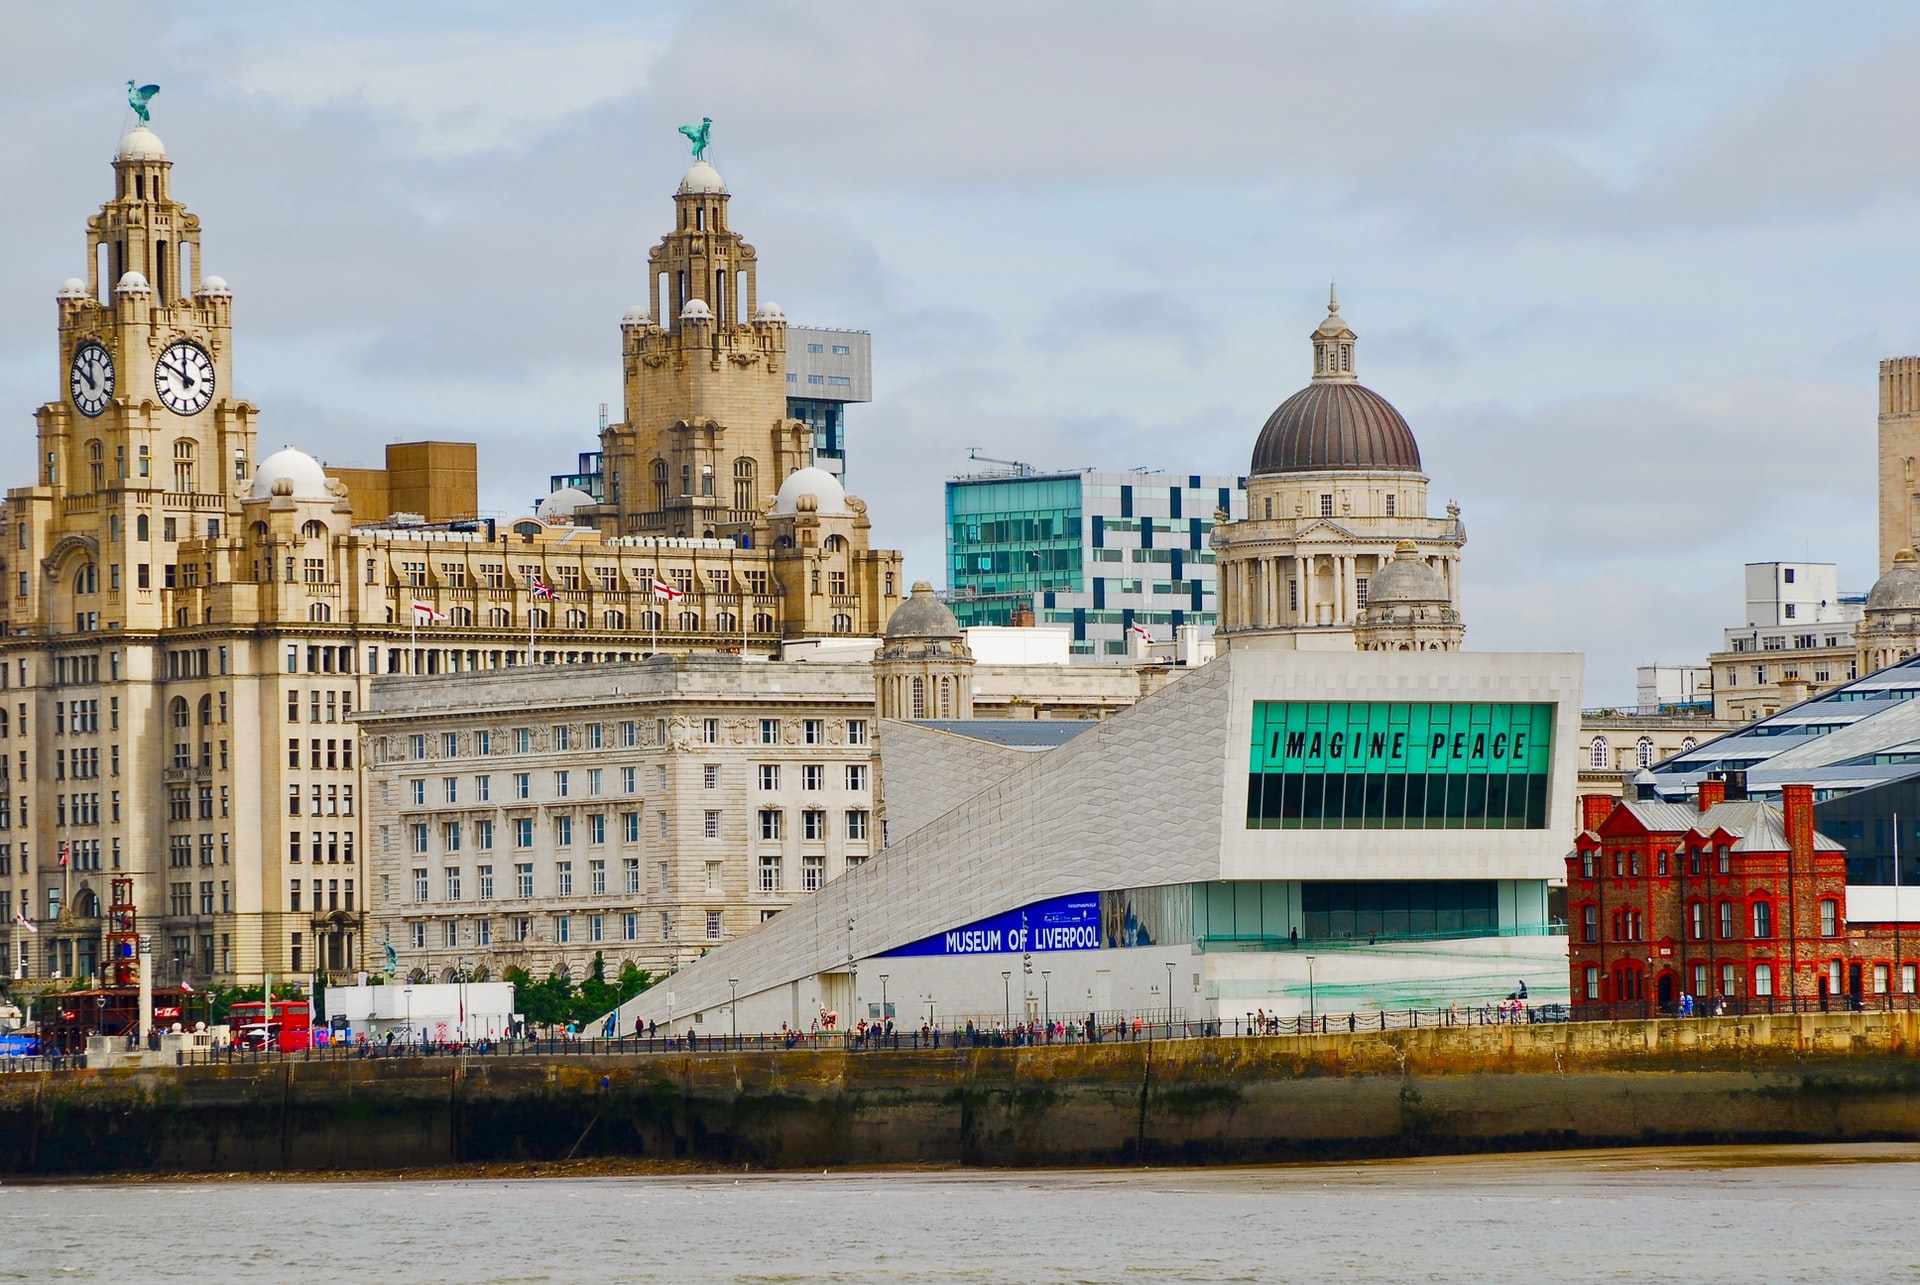 museum-of-liverpool-on-liverpool-docks-and-river-from-across-the-city-on-a-cloudy-day